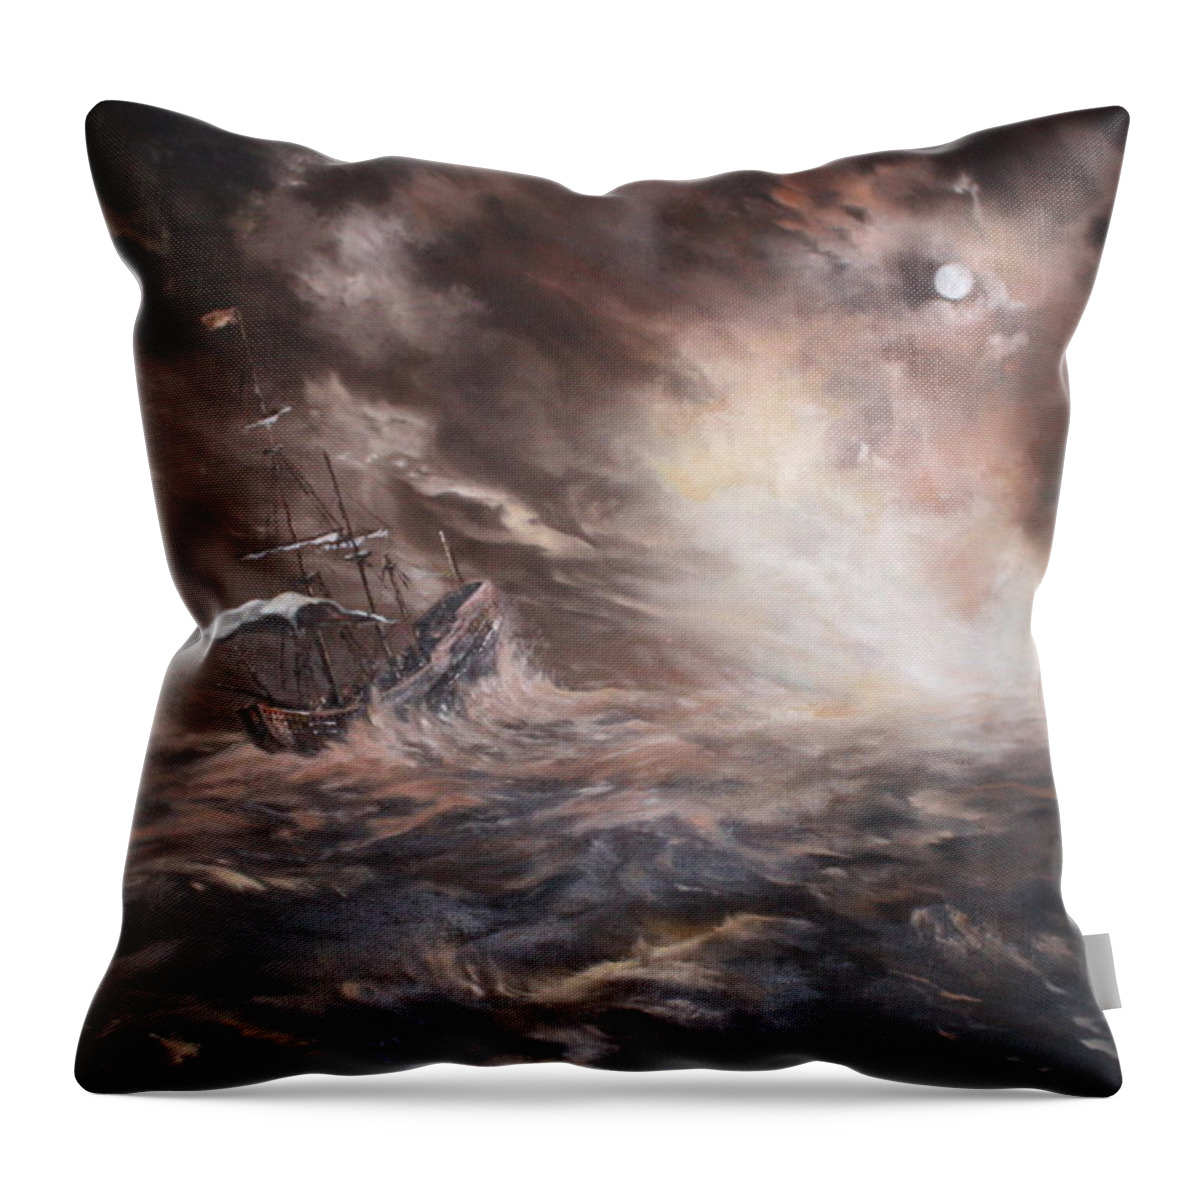 Merchant Royal Throw Pillow featuring the painting The Merchant Royal by Jean Walker